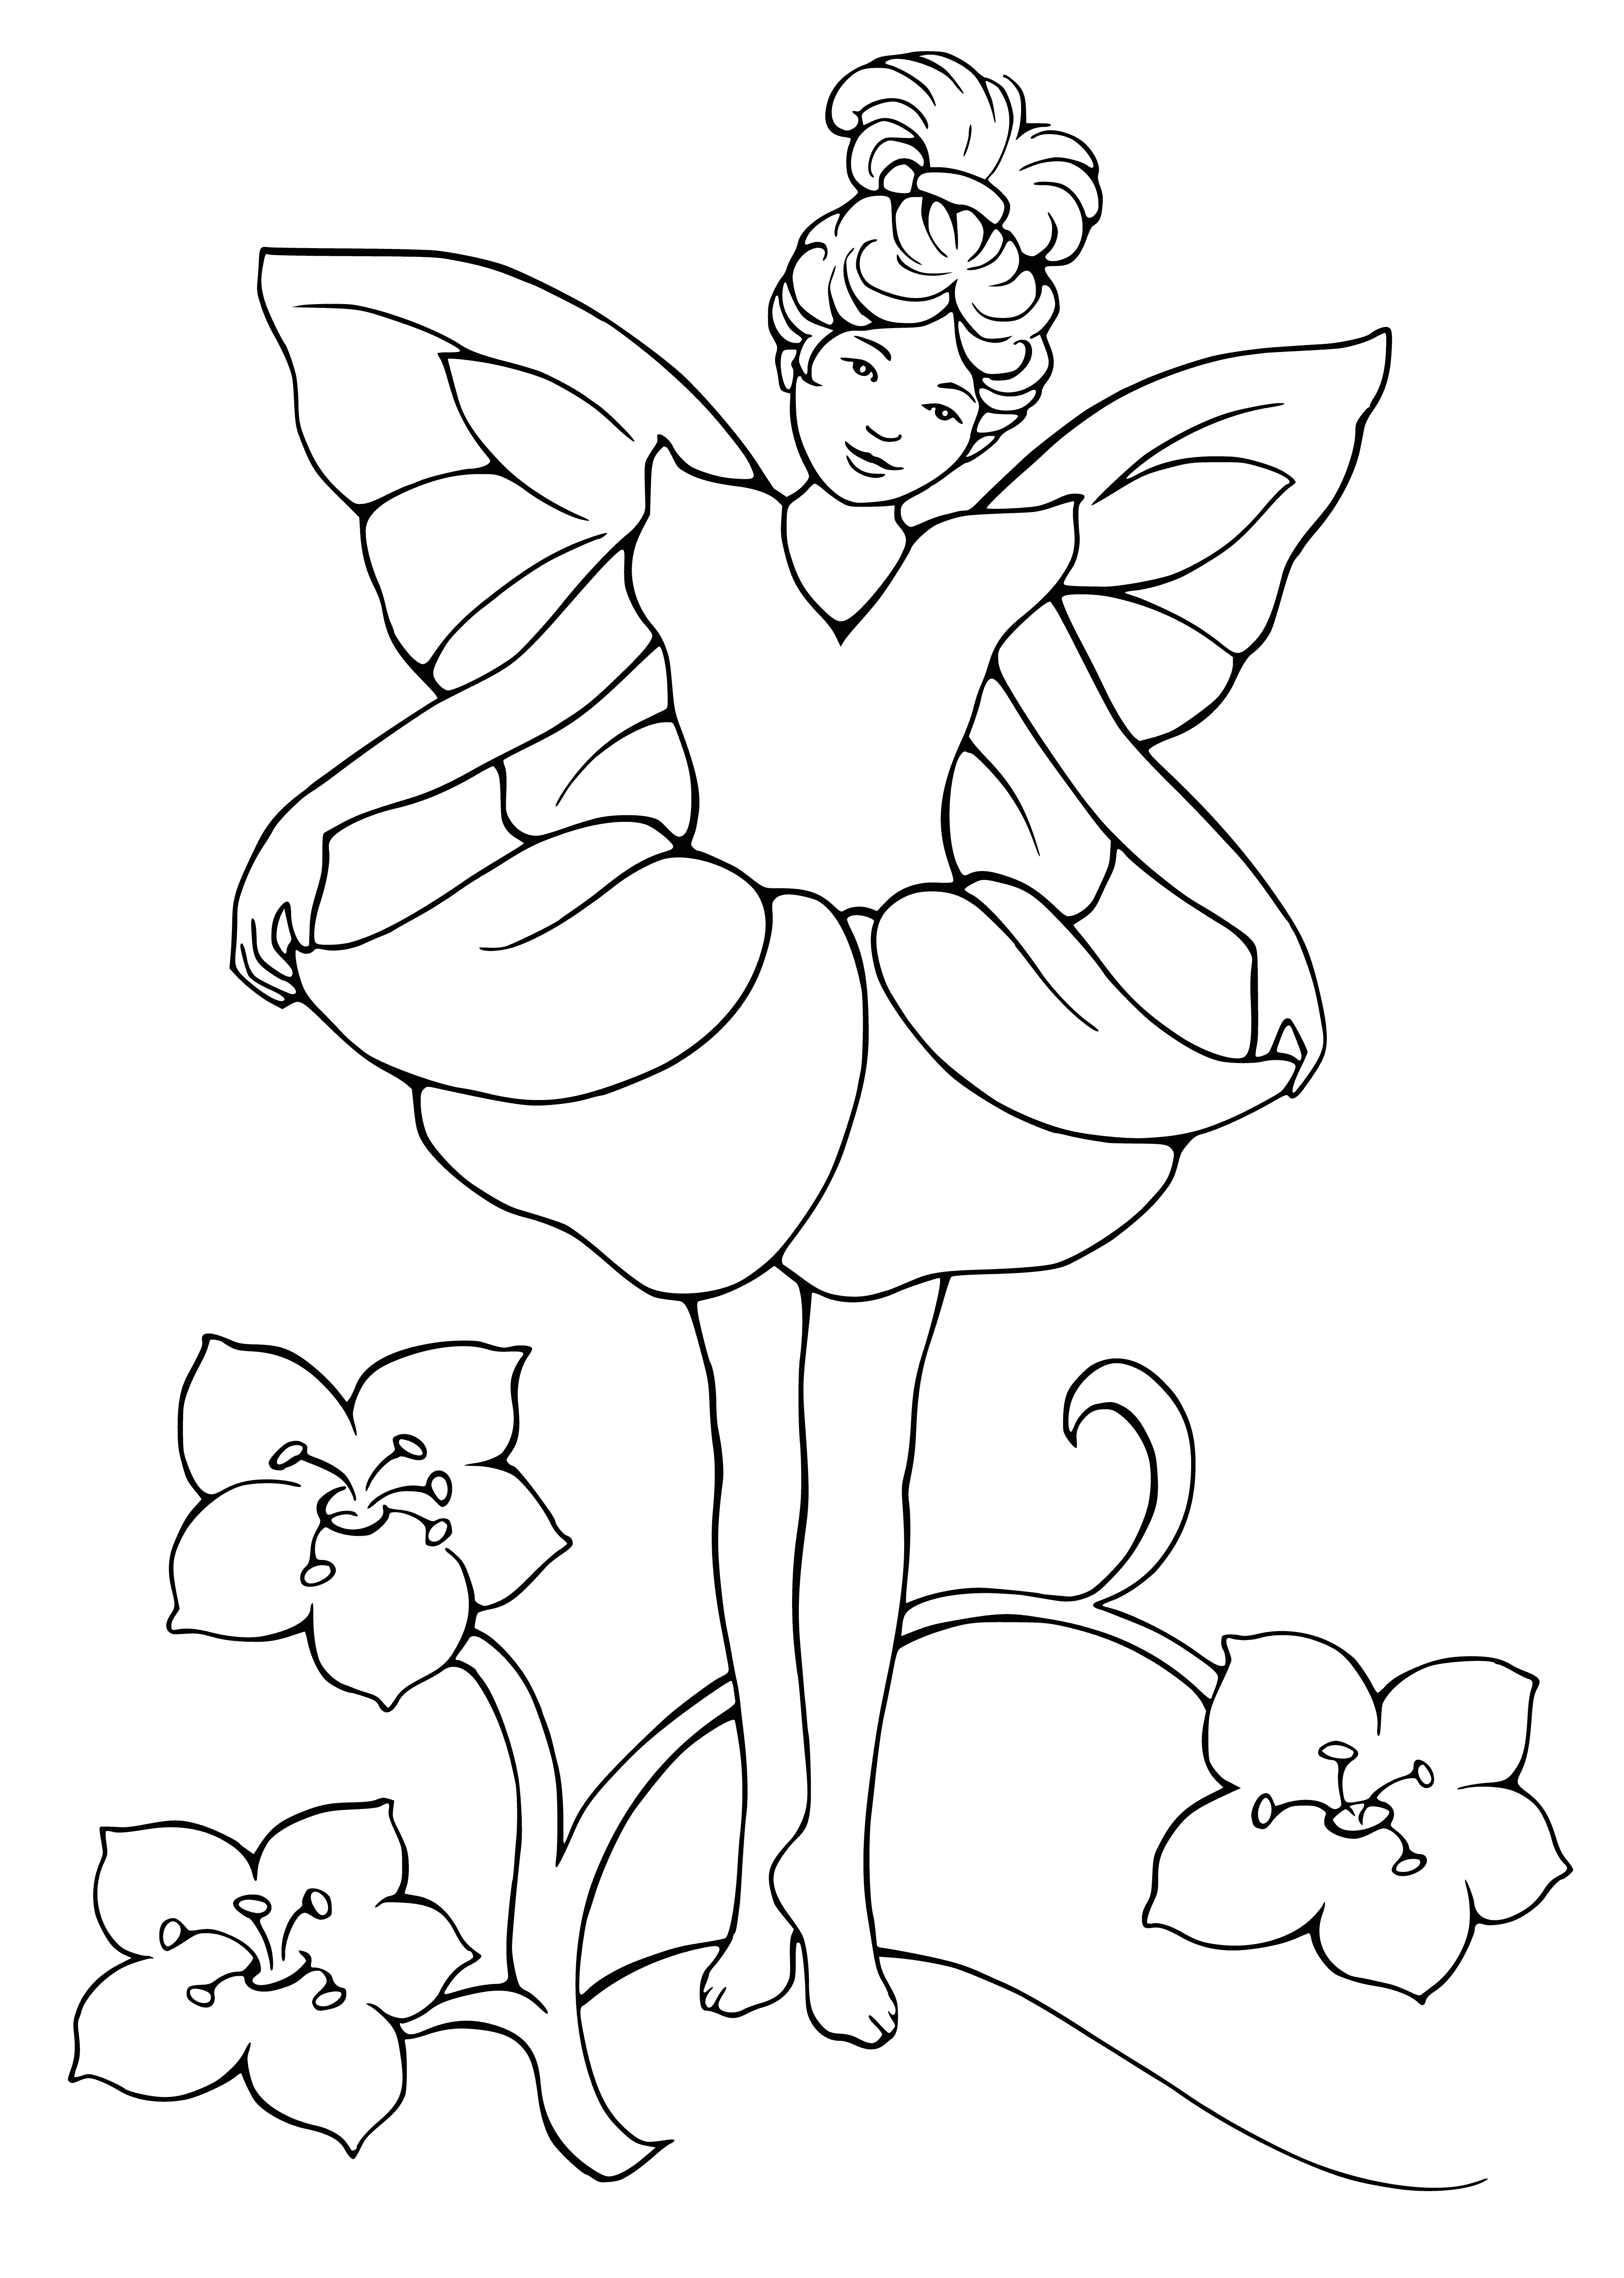 coloring page: Elves and fairies with winged dresses of petals and hair of leaves surrounded by flowers in coloring page.